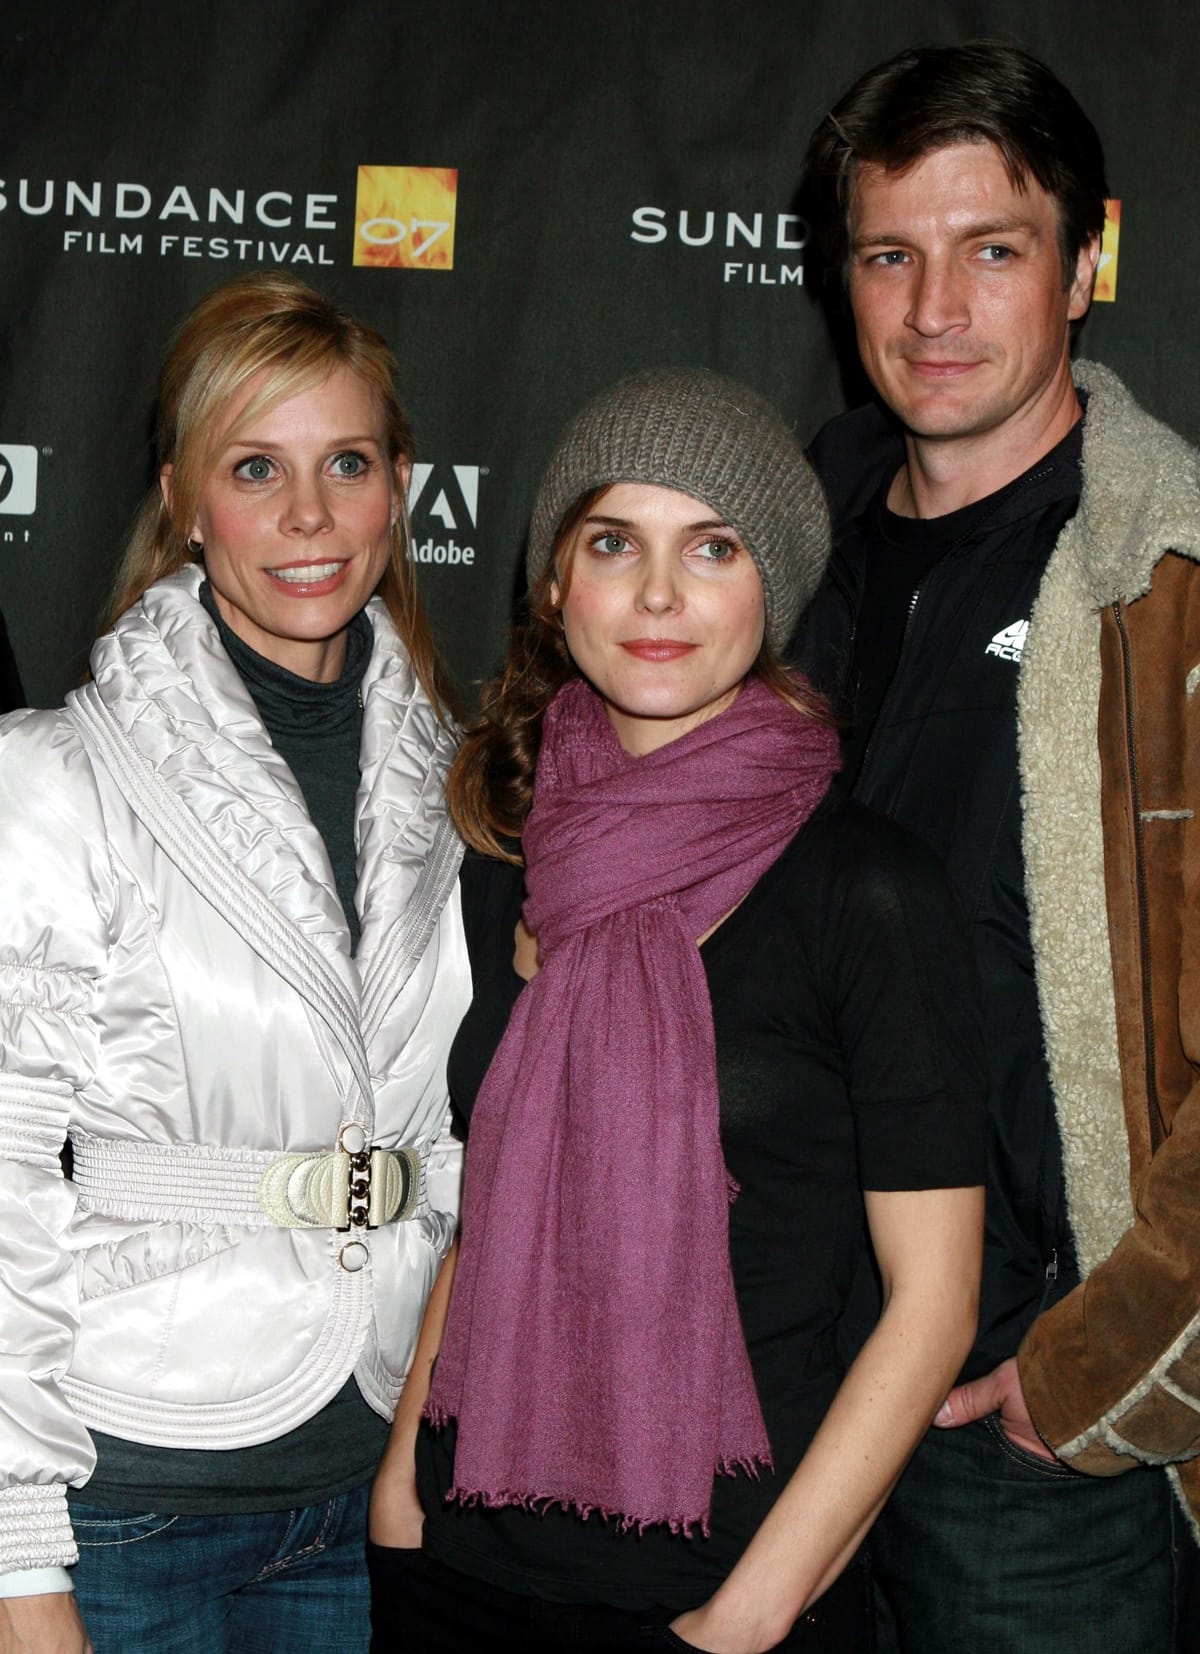 At the 2007 Sundance Film Festival to promote 